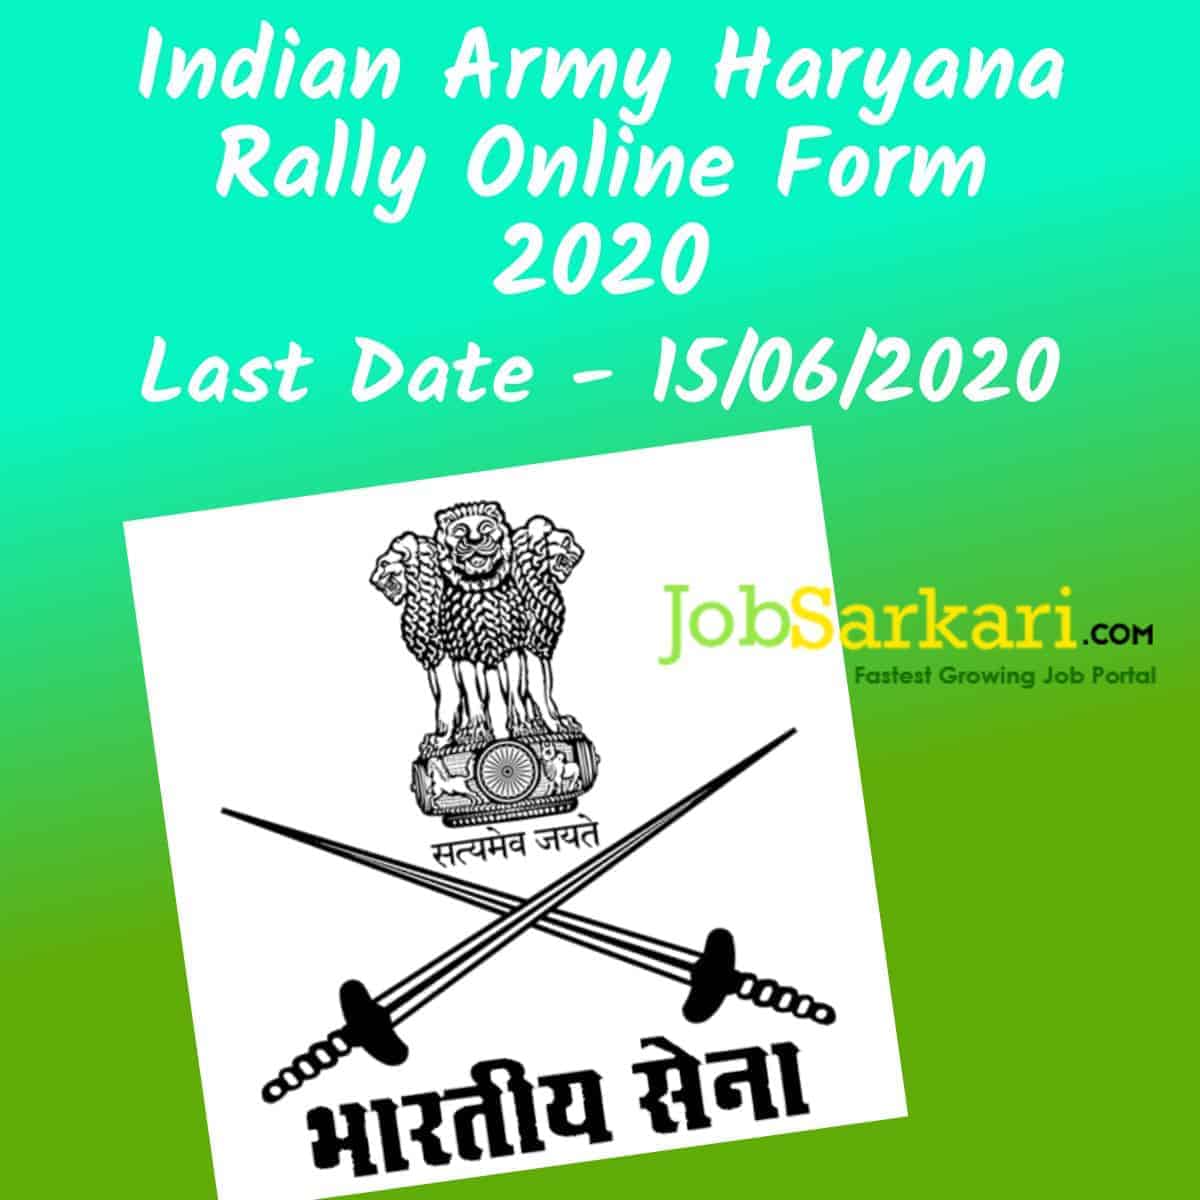 Indian Army Haryana Rally Online Form 2020